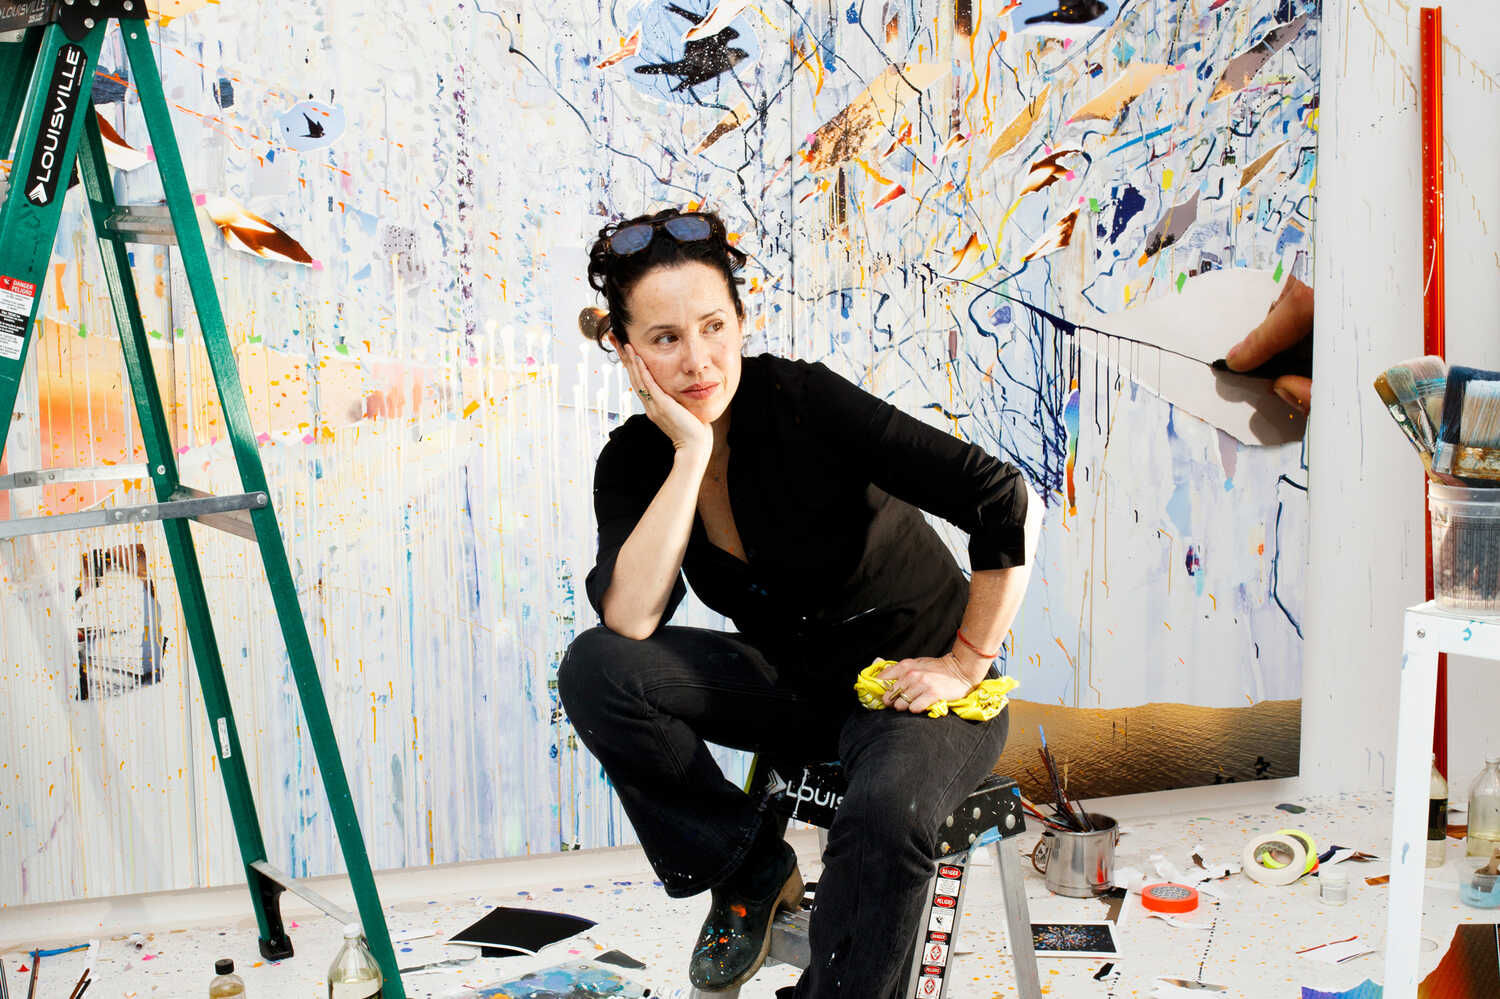 Sarah Sze, photographed in her New York studio with an in-progress painting.